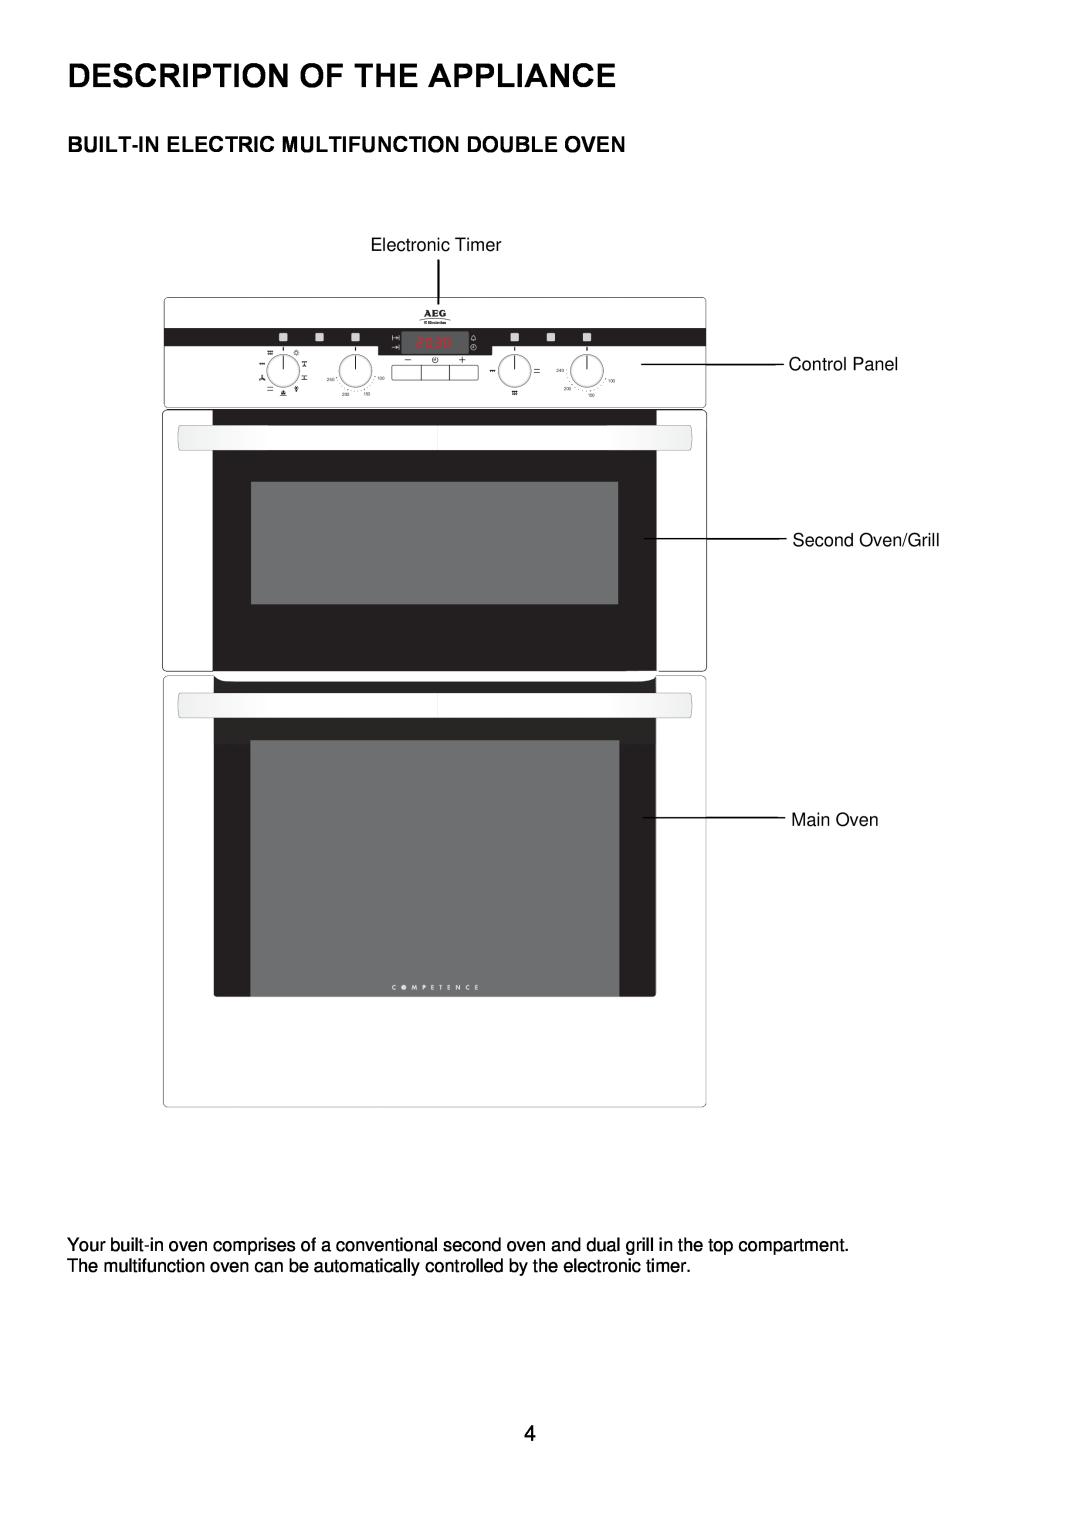 Electrolux D4101-5 Description Of The Appliance, Built-In Electric Multifunction Double Oven, 250 200, 240 100 200 150 